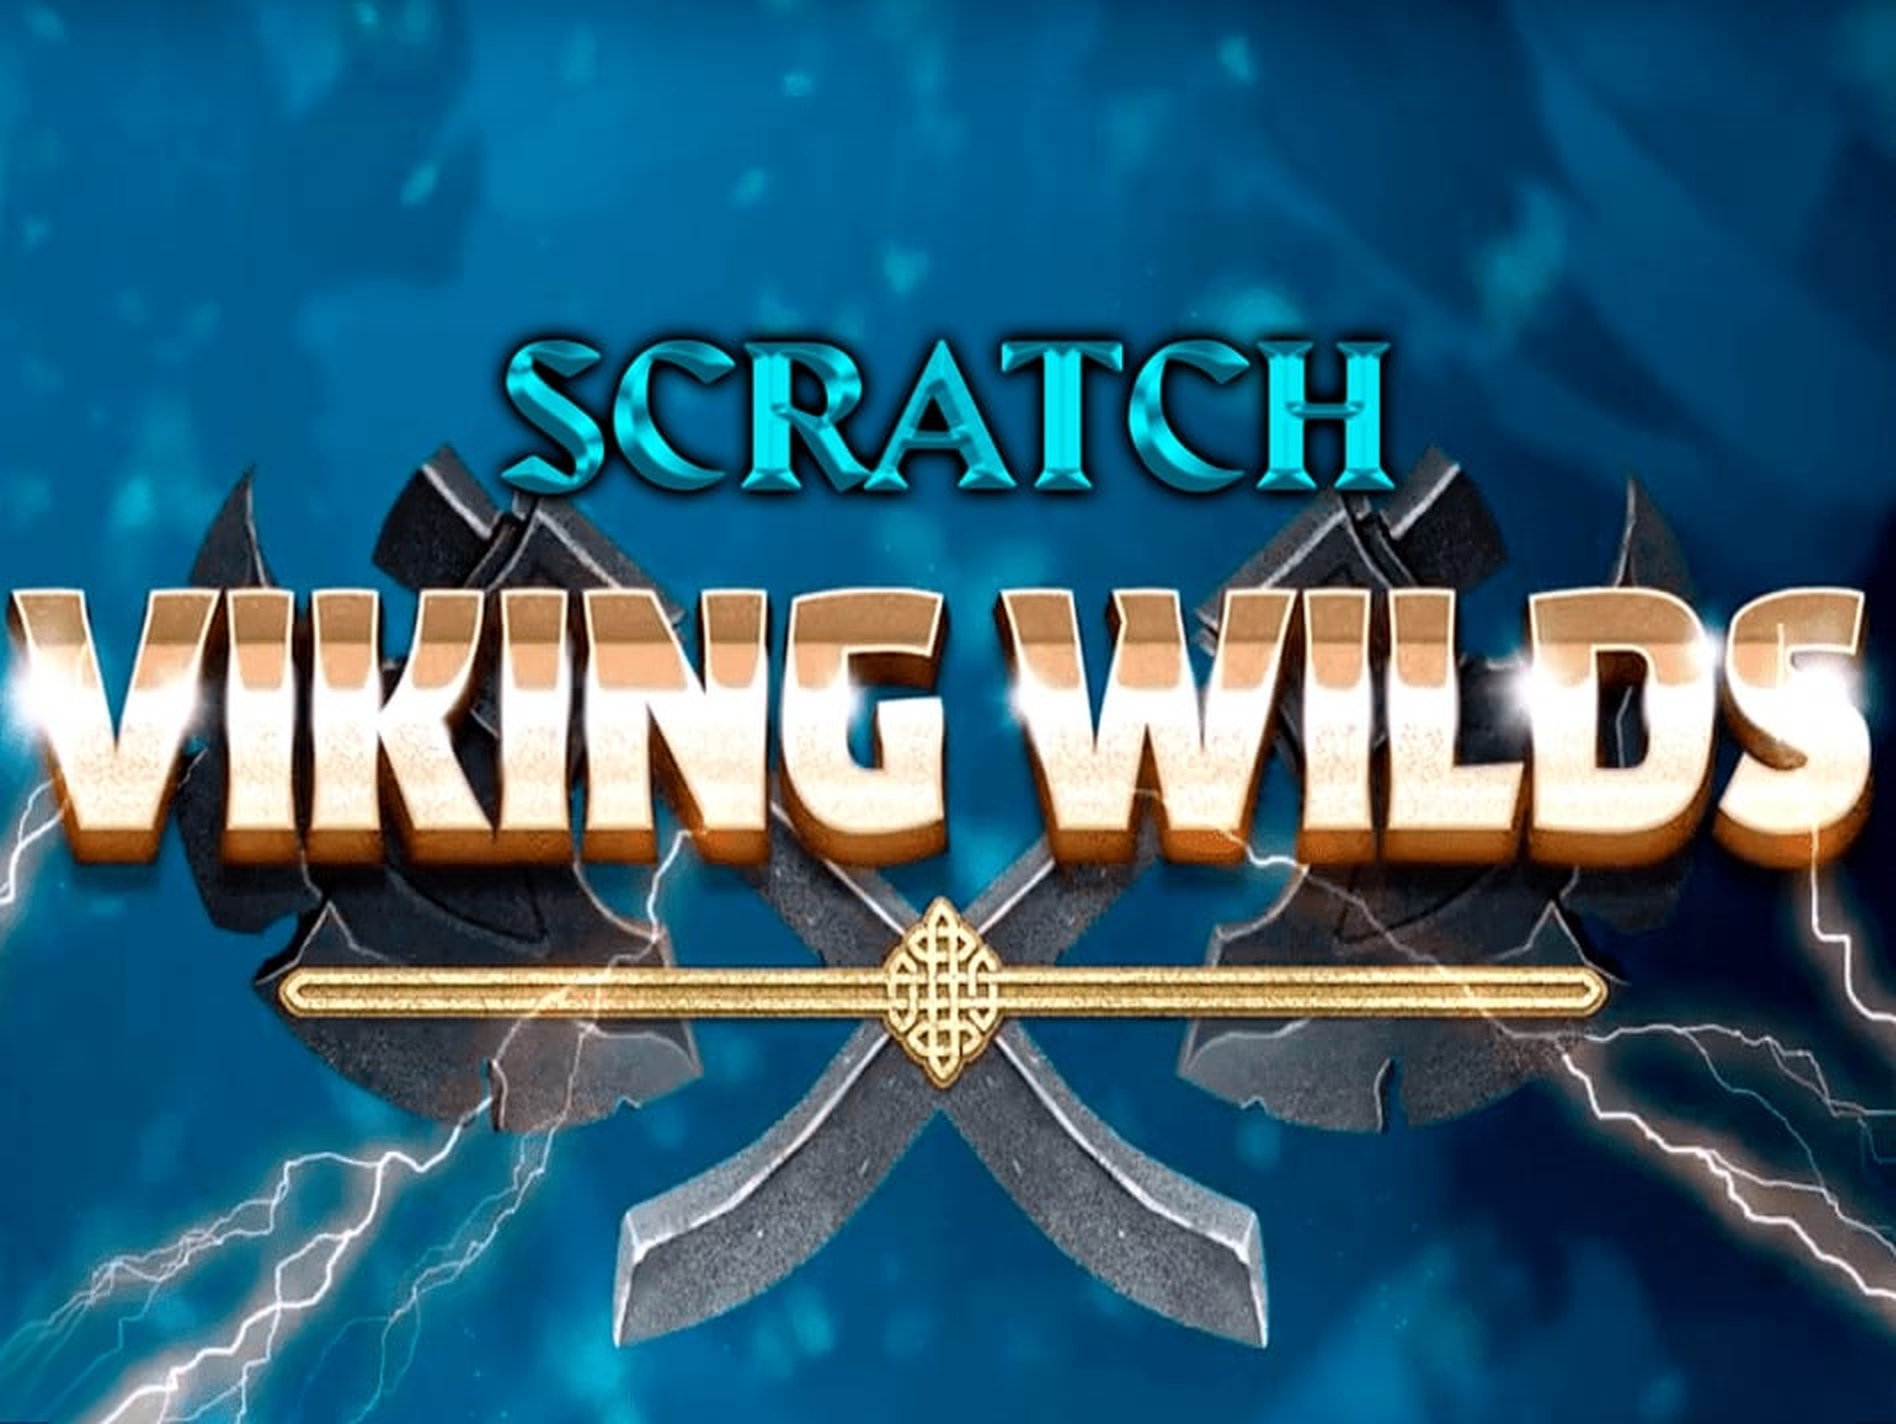 The Viking Wilds Scratch Online Slot Demo Game by Iron Dog Studios